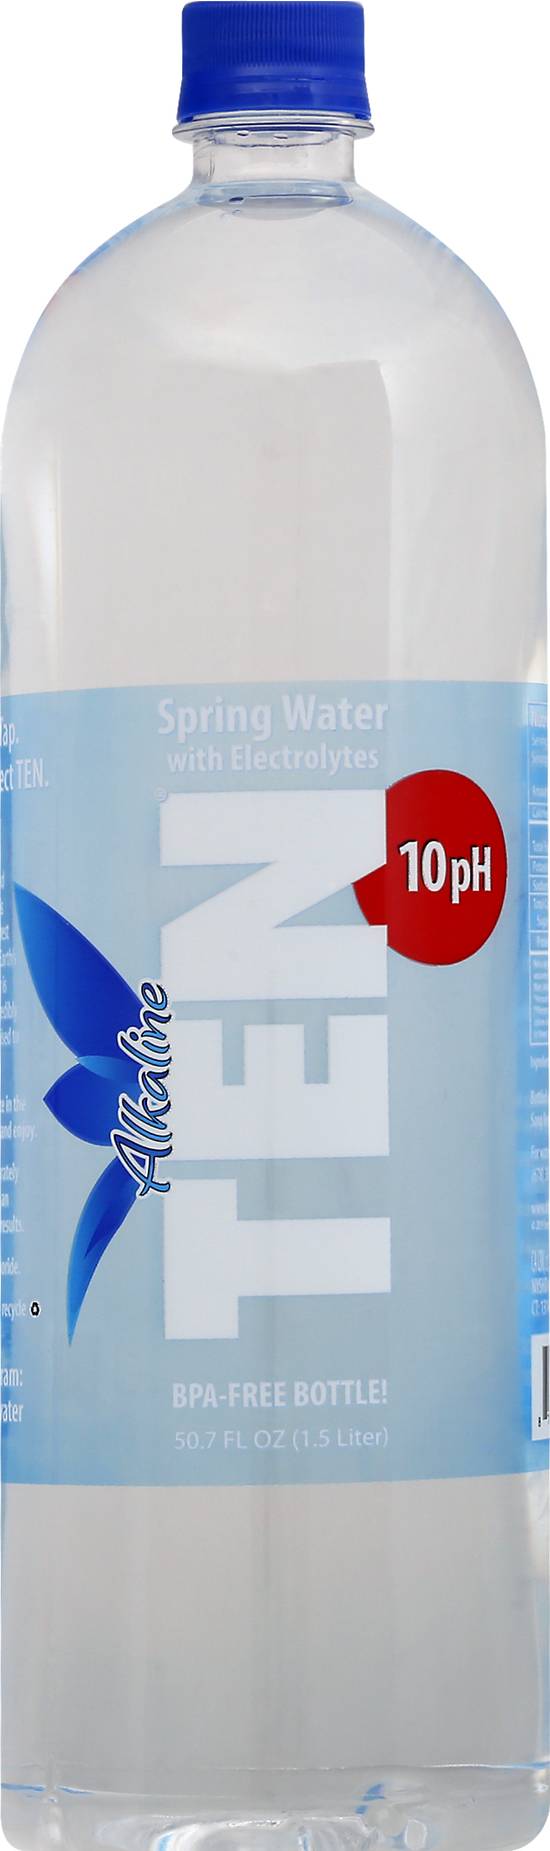 About TEN Spring Water